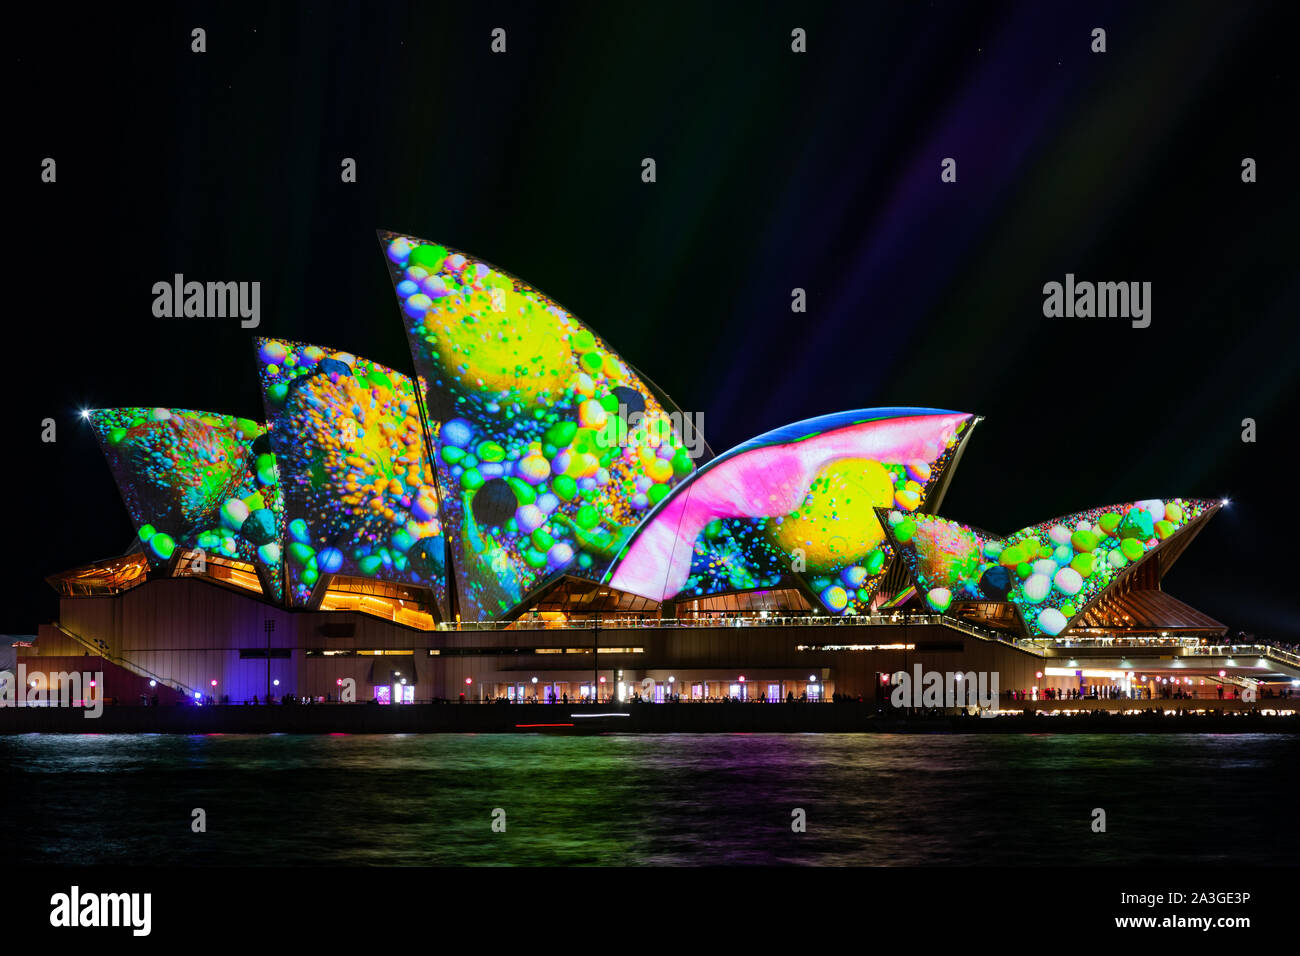 Sydney, Australia - 27. May 2017: The famous Sydney Opera House is illuminated with different designs in vibrant colors during the annual Vivid Sydney Stock Photo